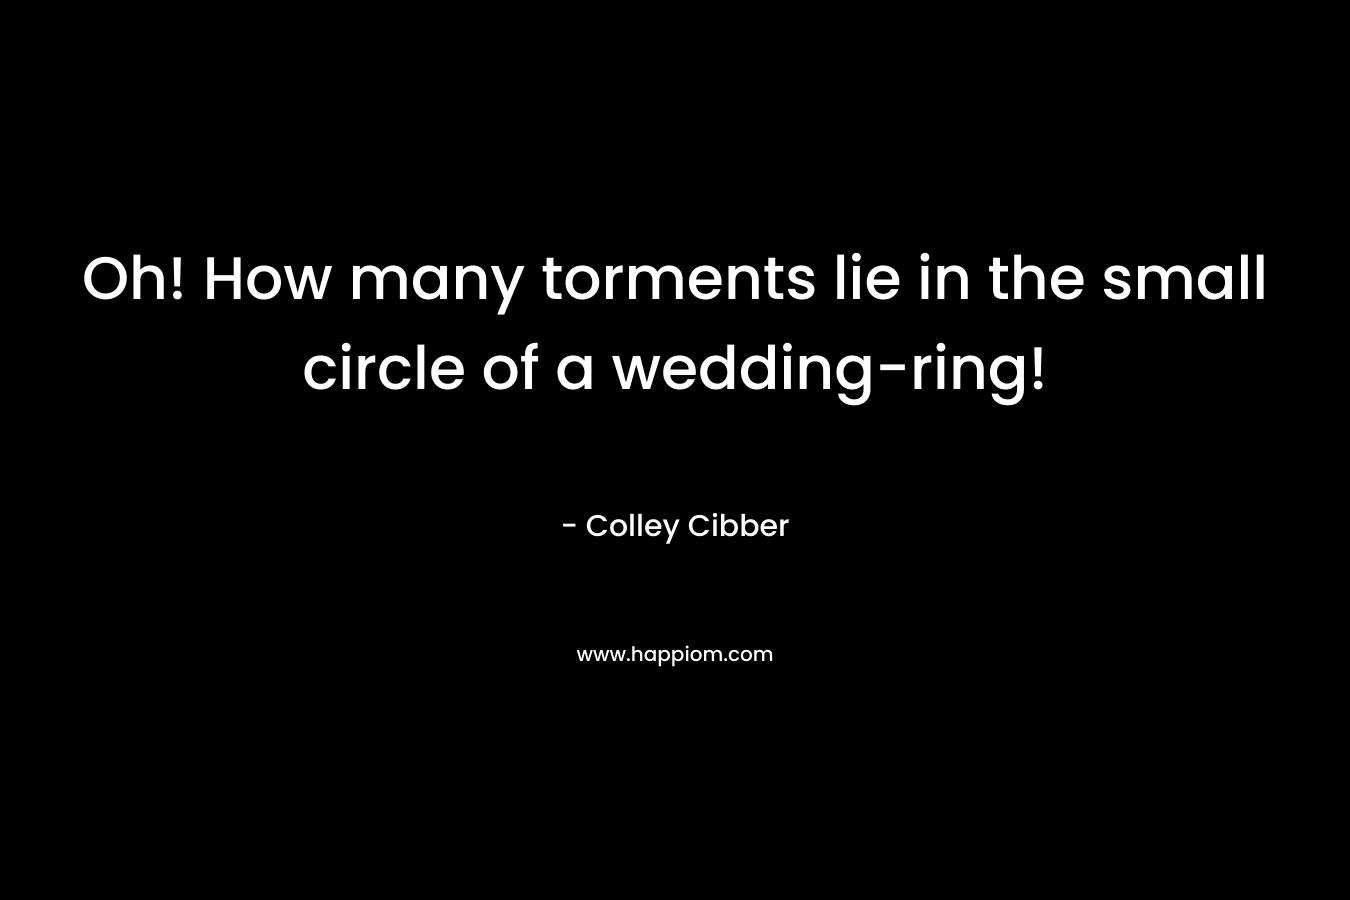 Oh! How many torments lie in the small circle of a wedding-ring! – Colley Cibber